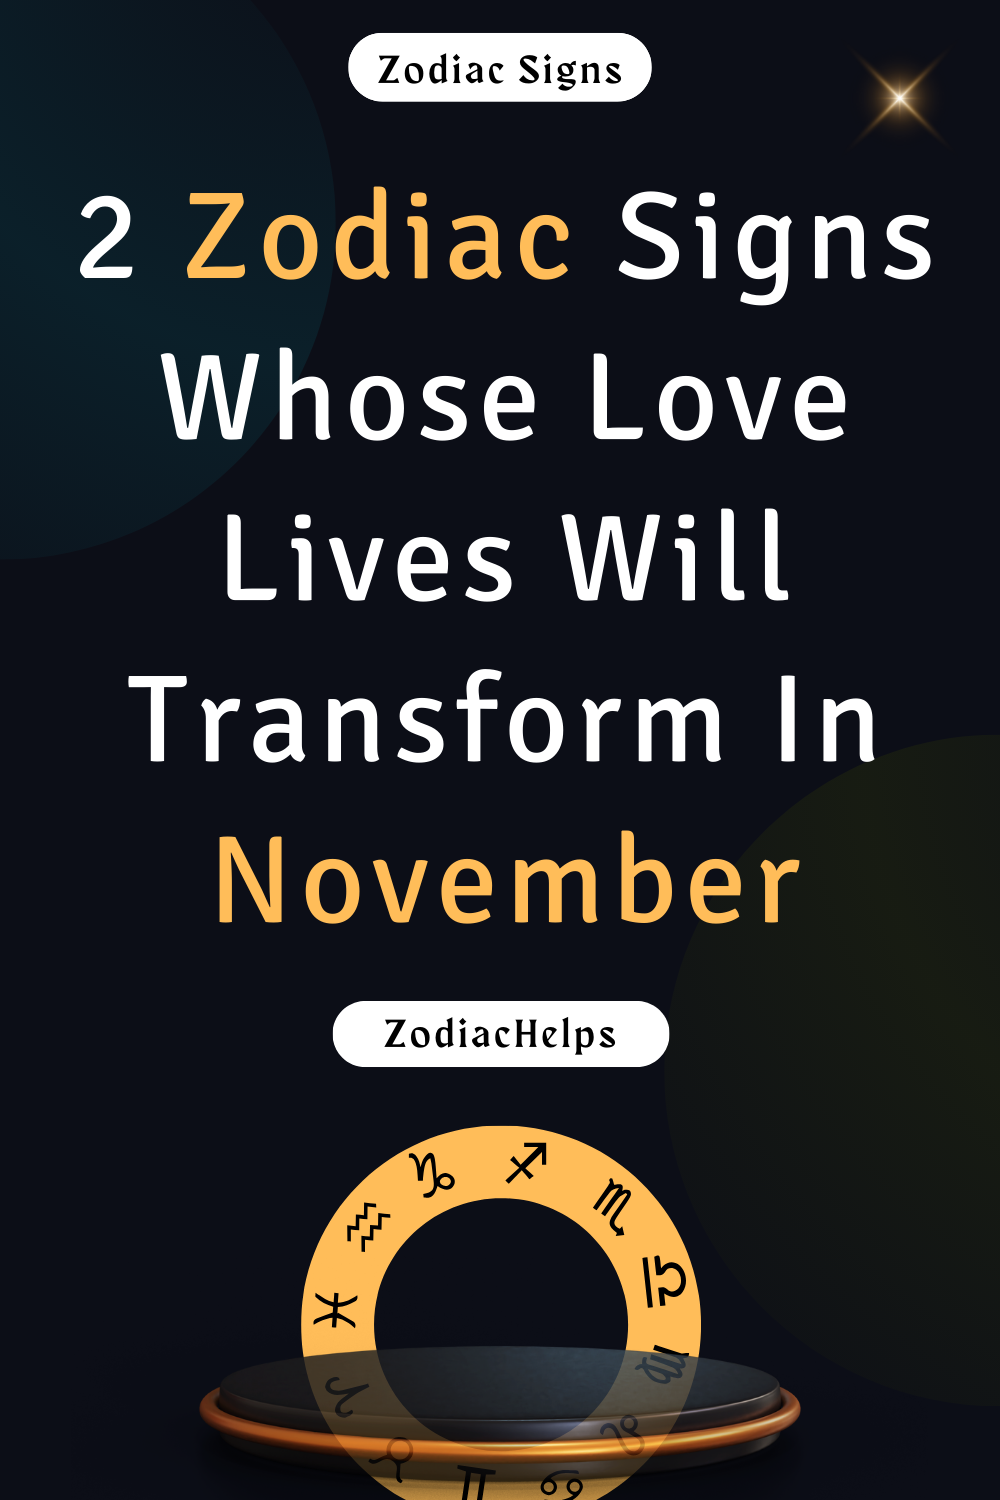 2 Zodiac Signs Whose Love Lives Will Transform In November